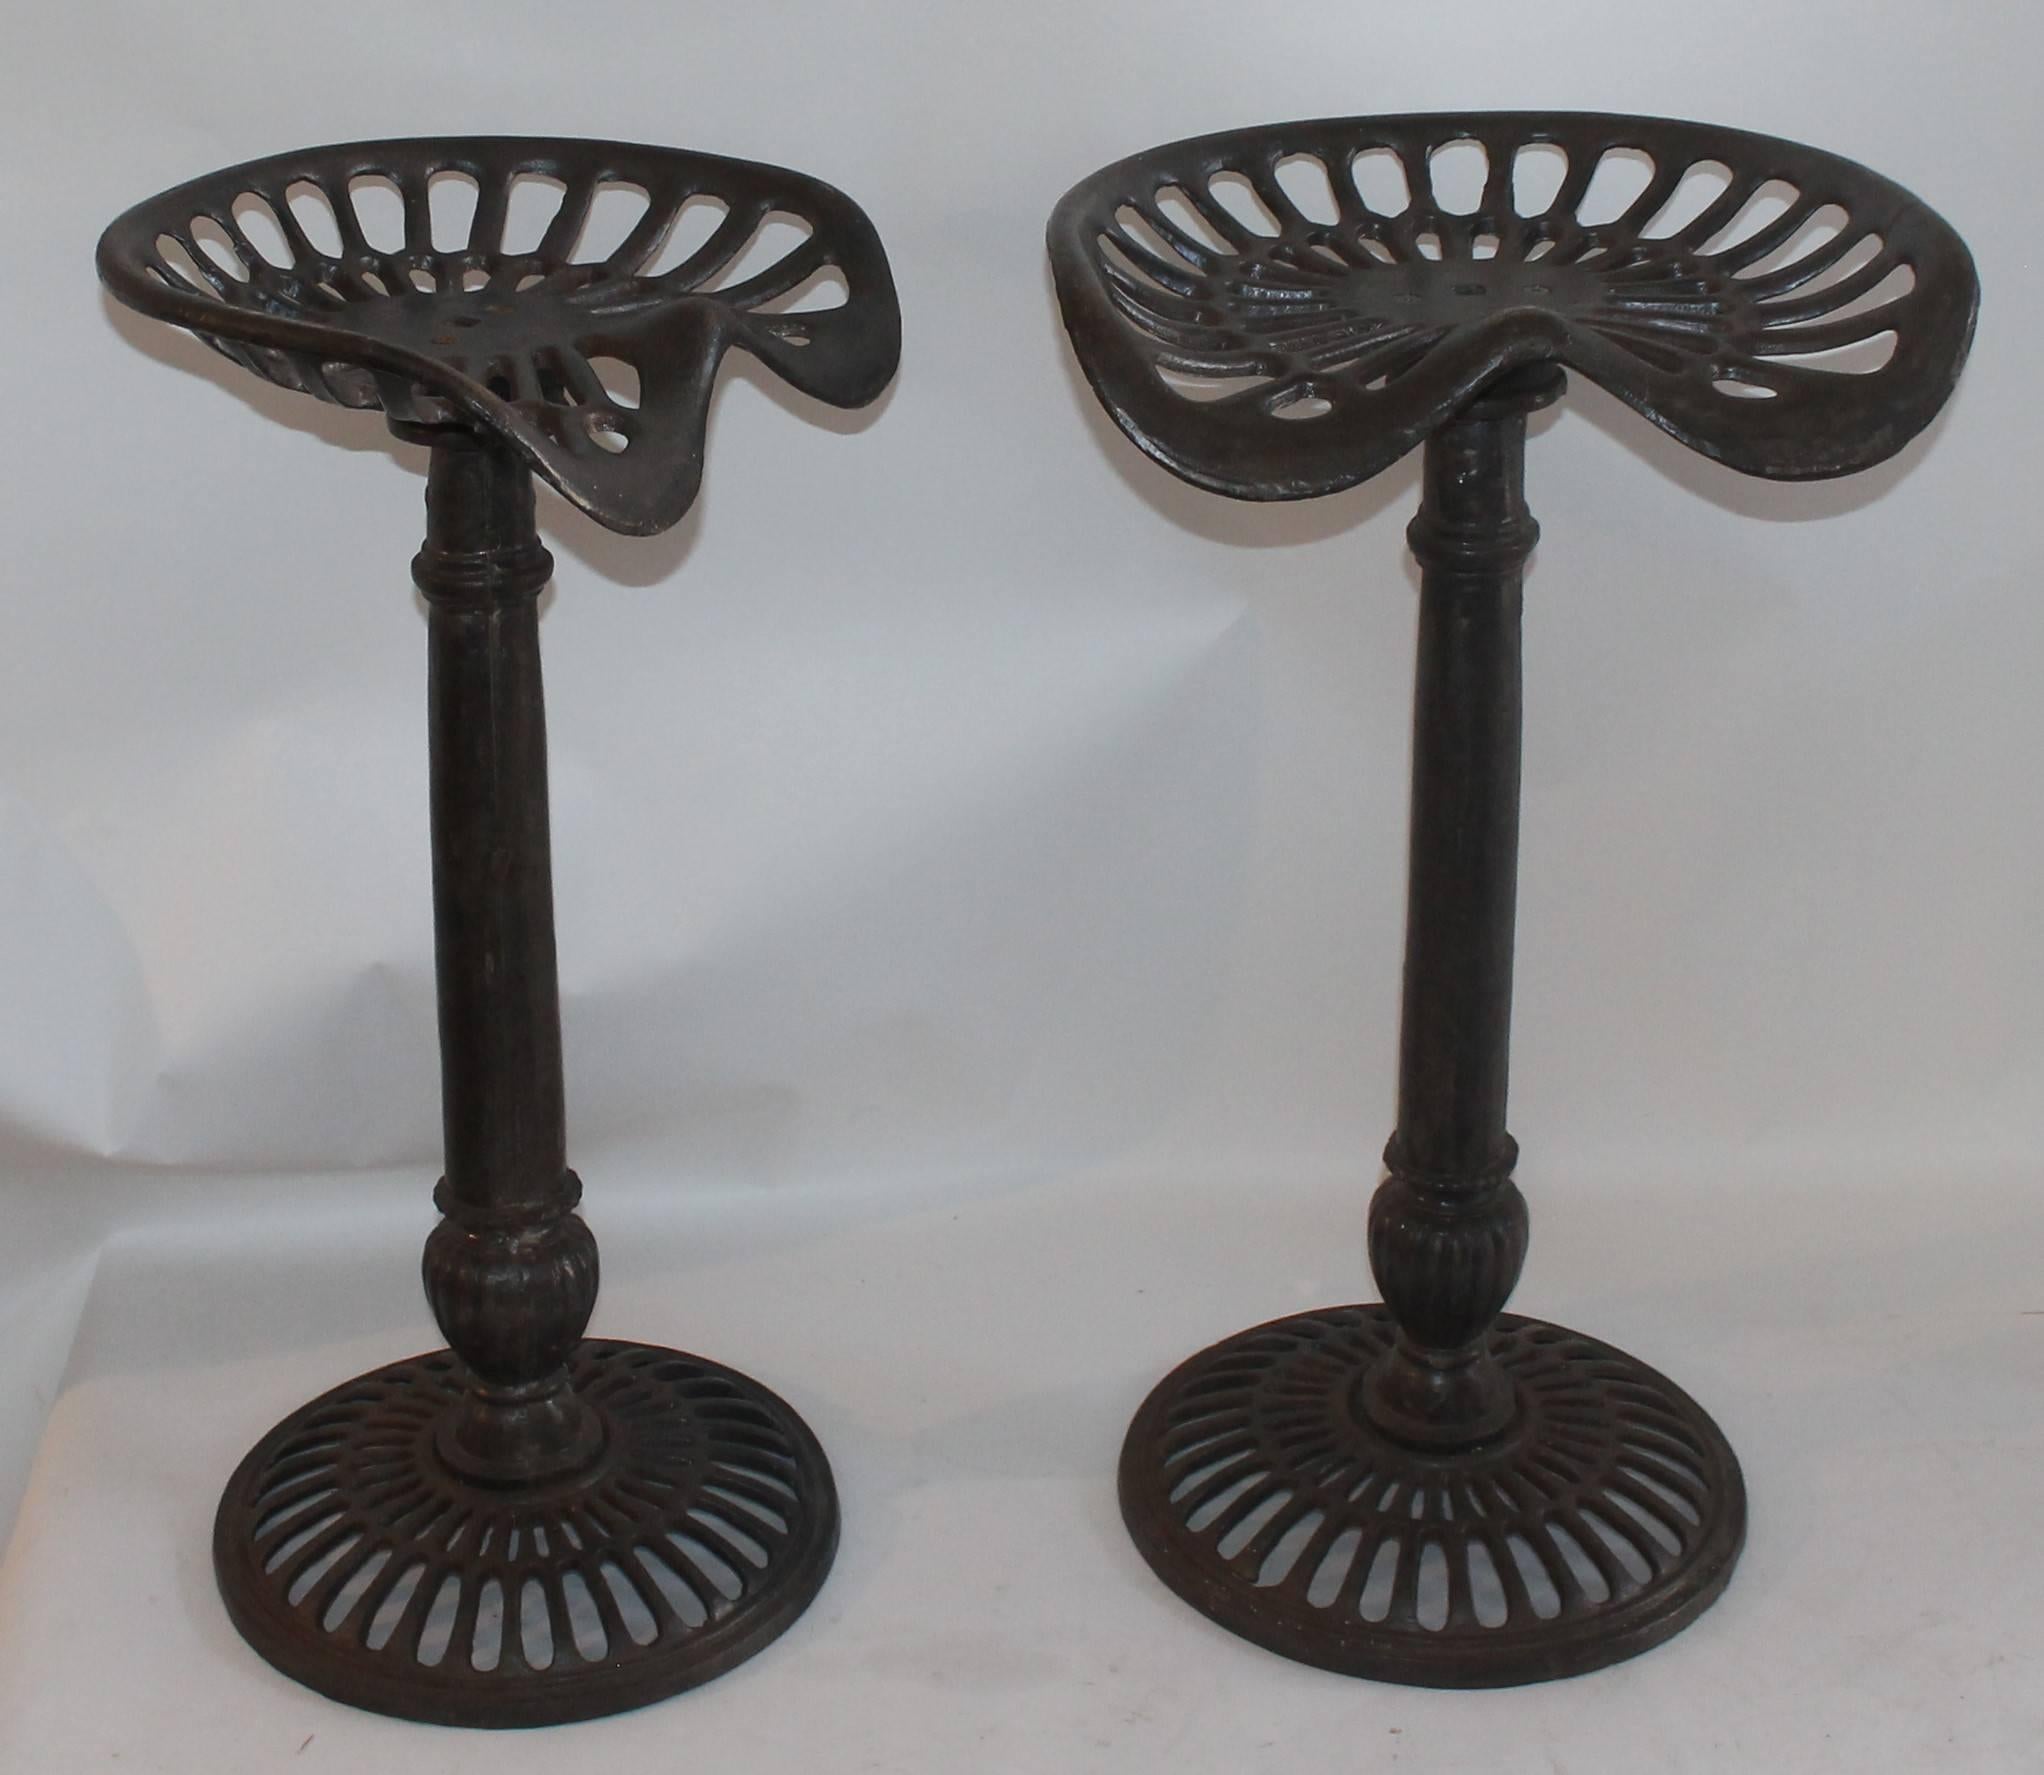 This pair of iron base and iron tractor seat bar stools are in good and sturdy condition.